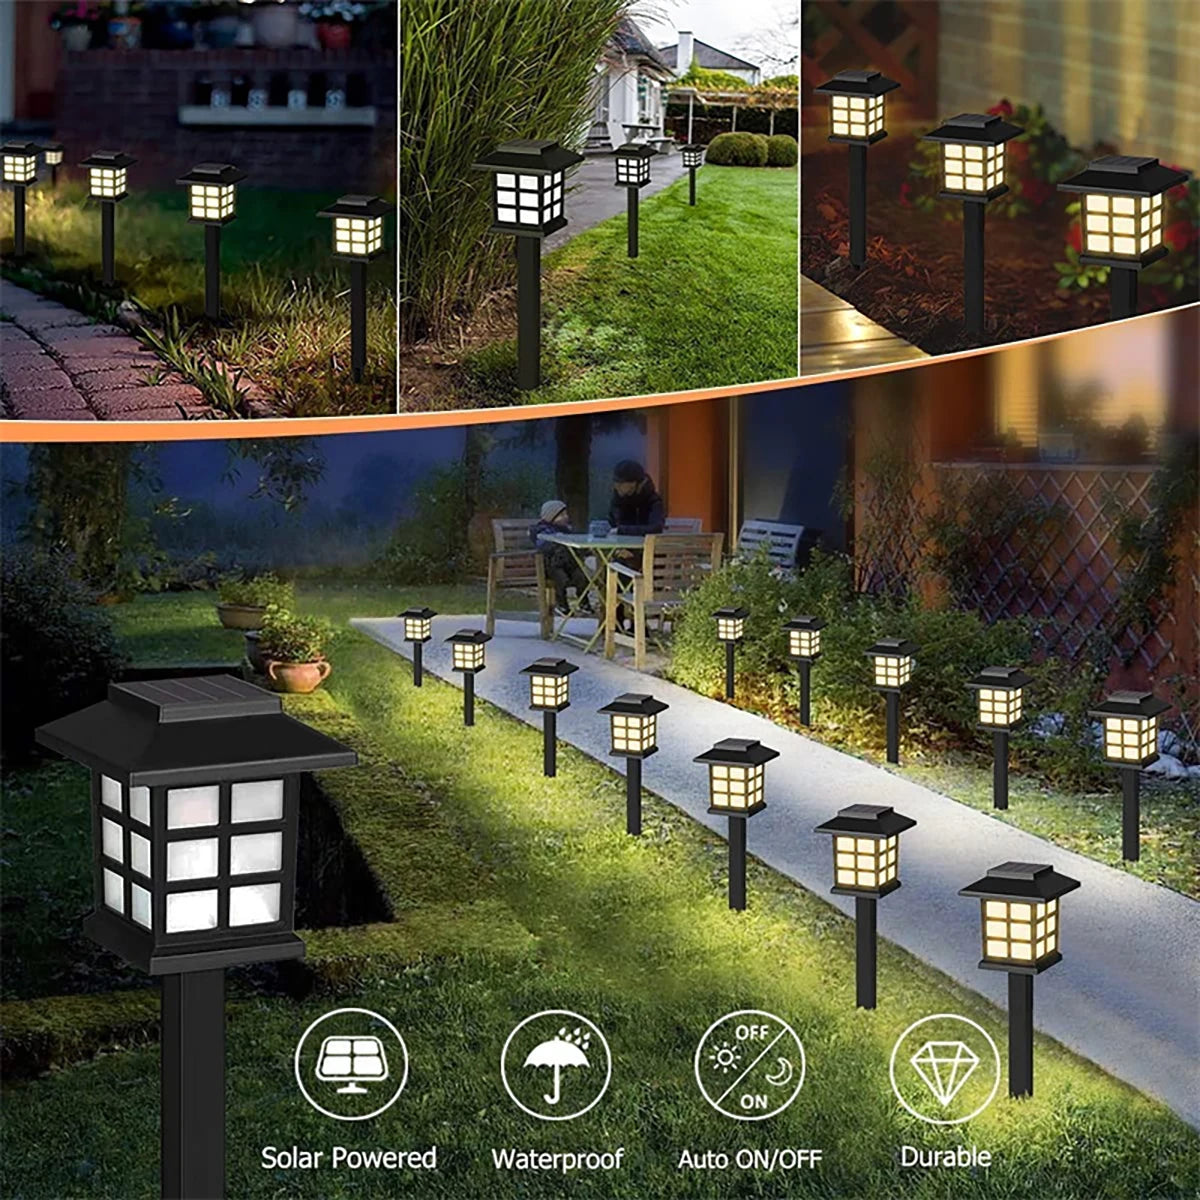 Outdoor Solar LED Lawn Light Pathway lamp Waterproof LED Night Lights